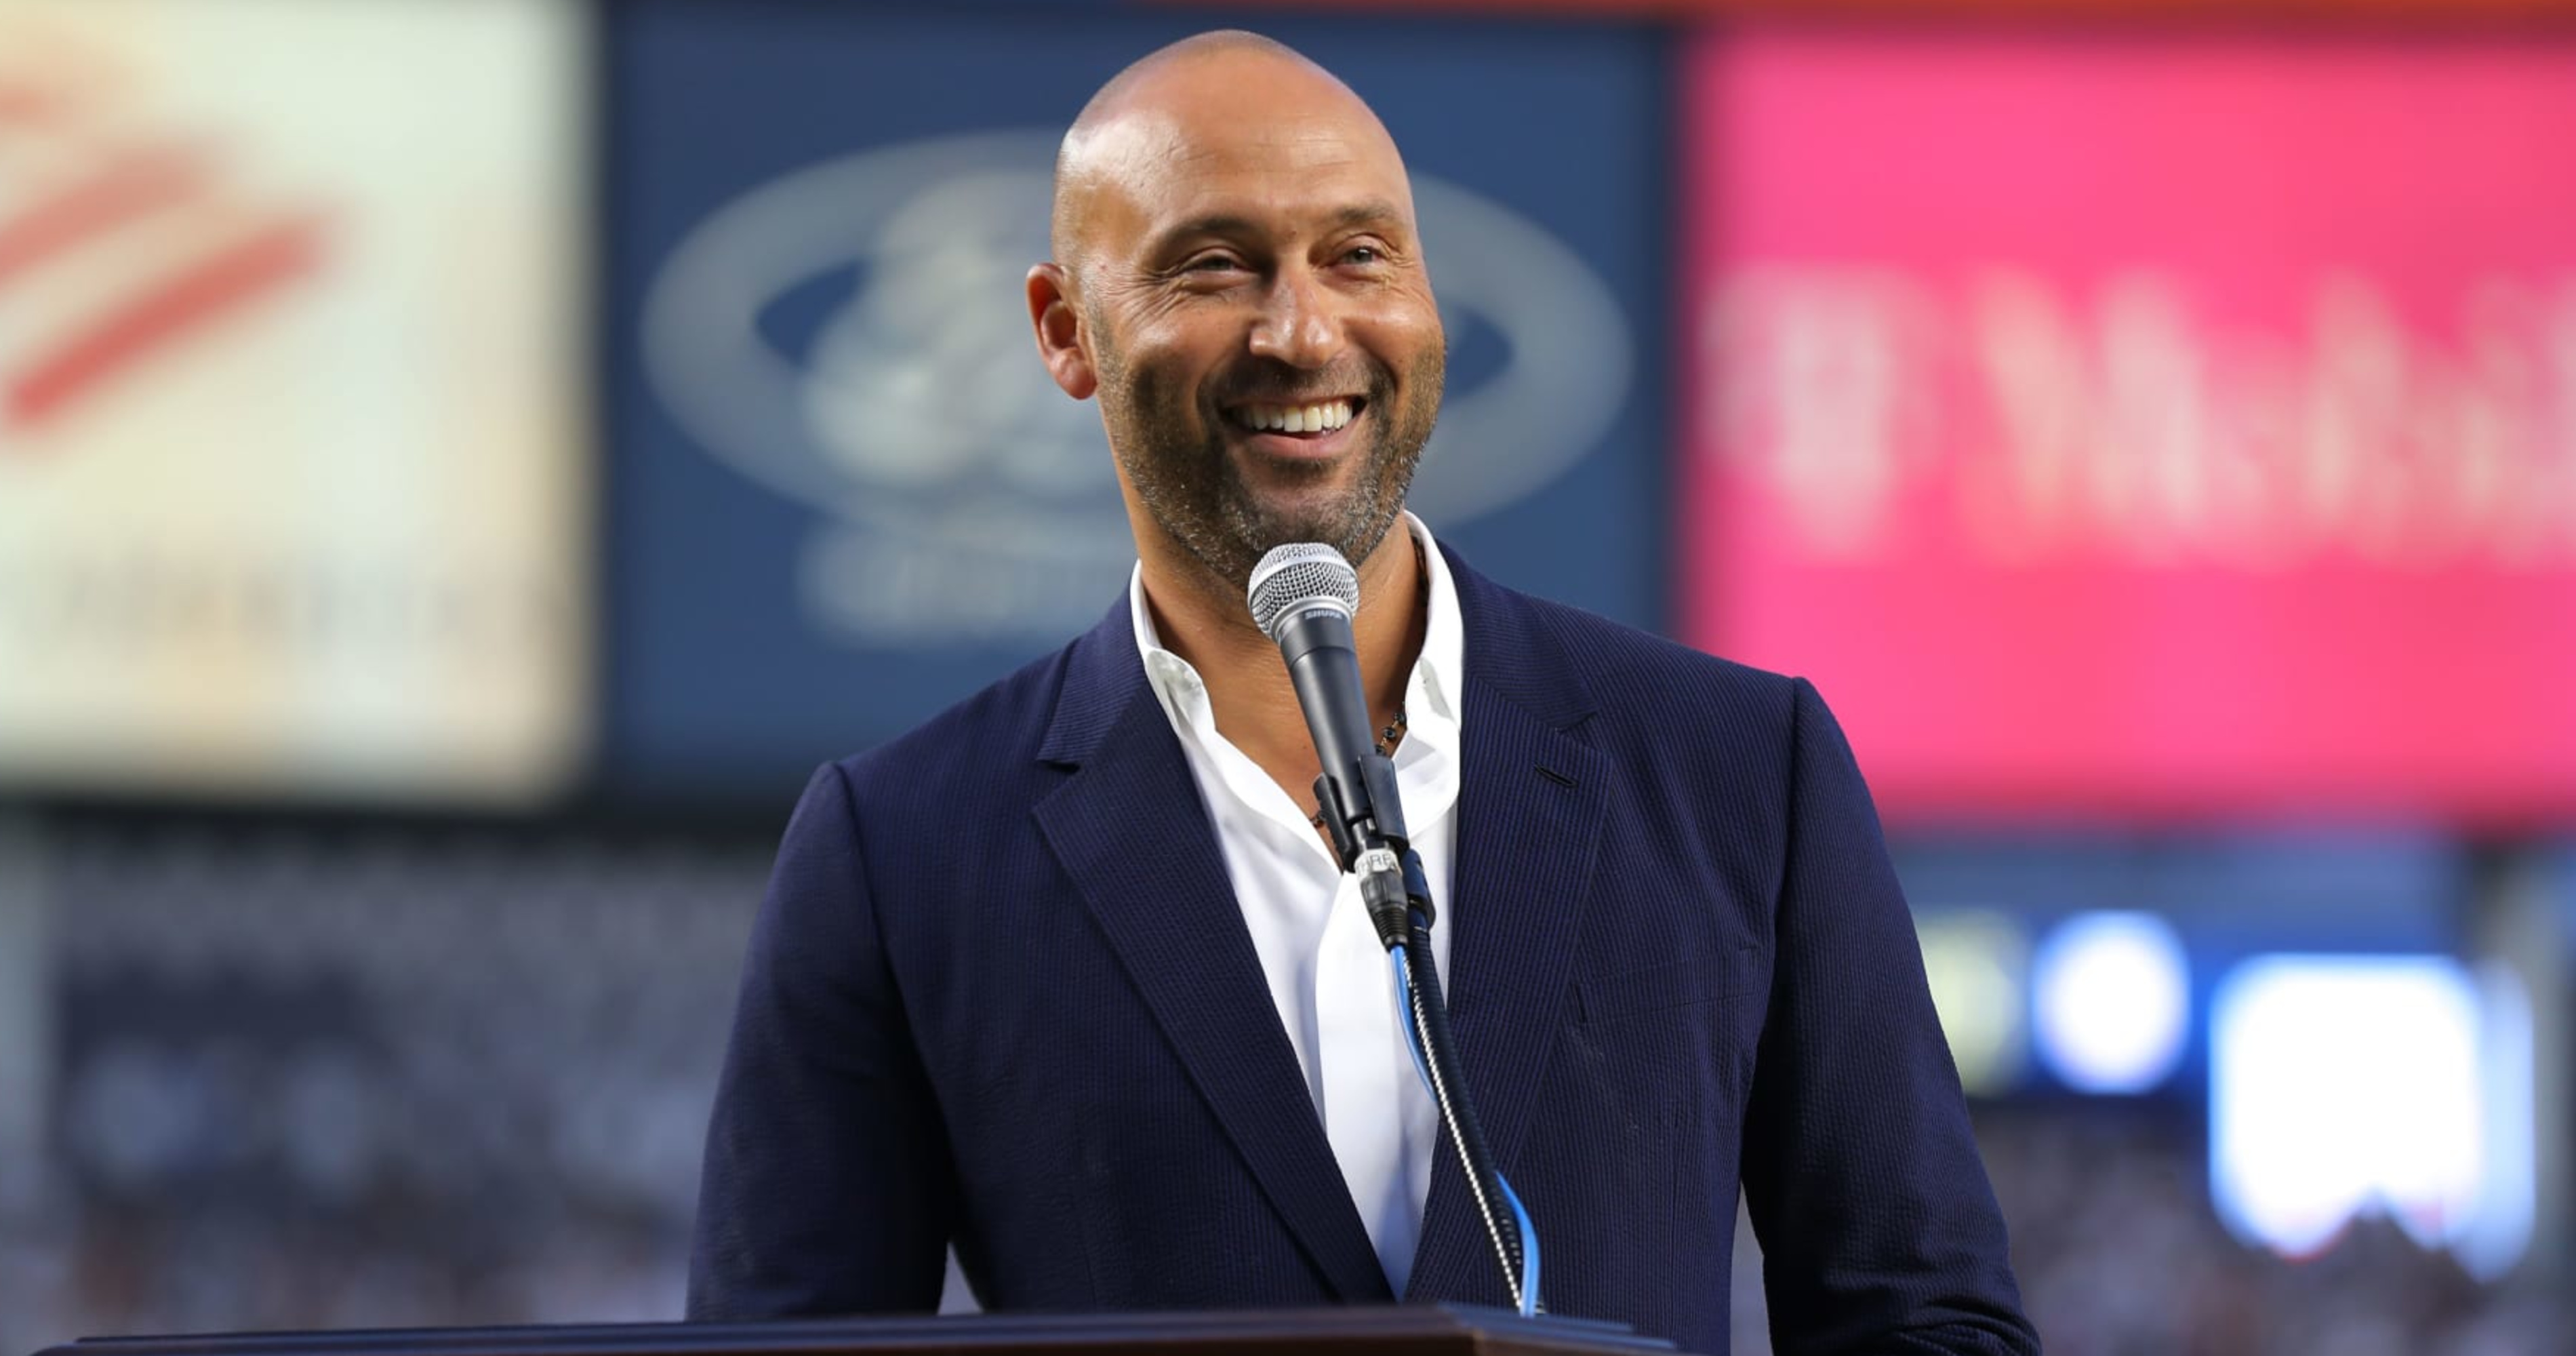 Yankees News: Derek Jeter, Don Mattingly Eyed by YES Network for Broadcast Booth